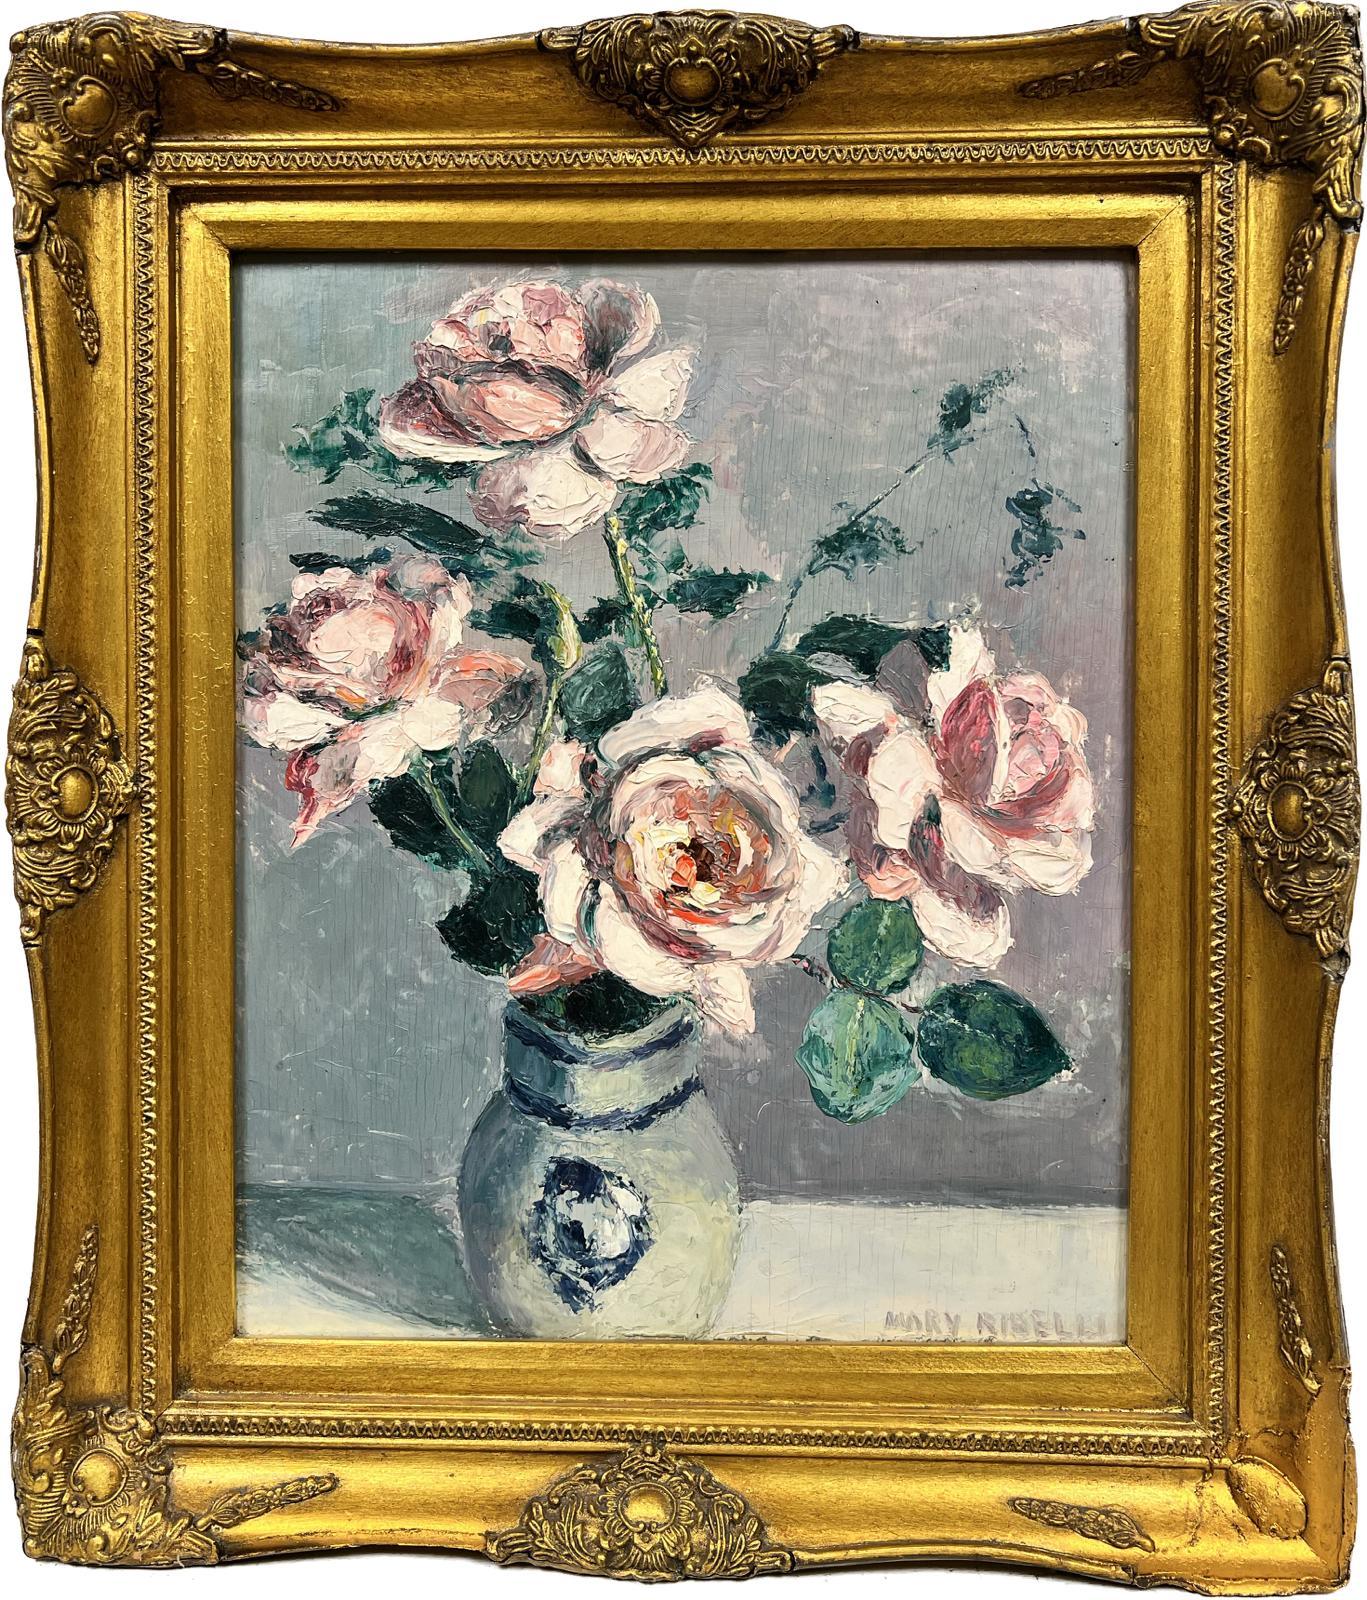 Mary Ribelli Interior Painting - 1950’s French Impressionist Signed Oil Pink Roses Paris still life gilt frame